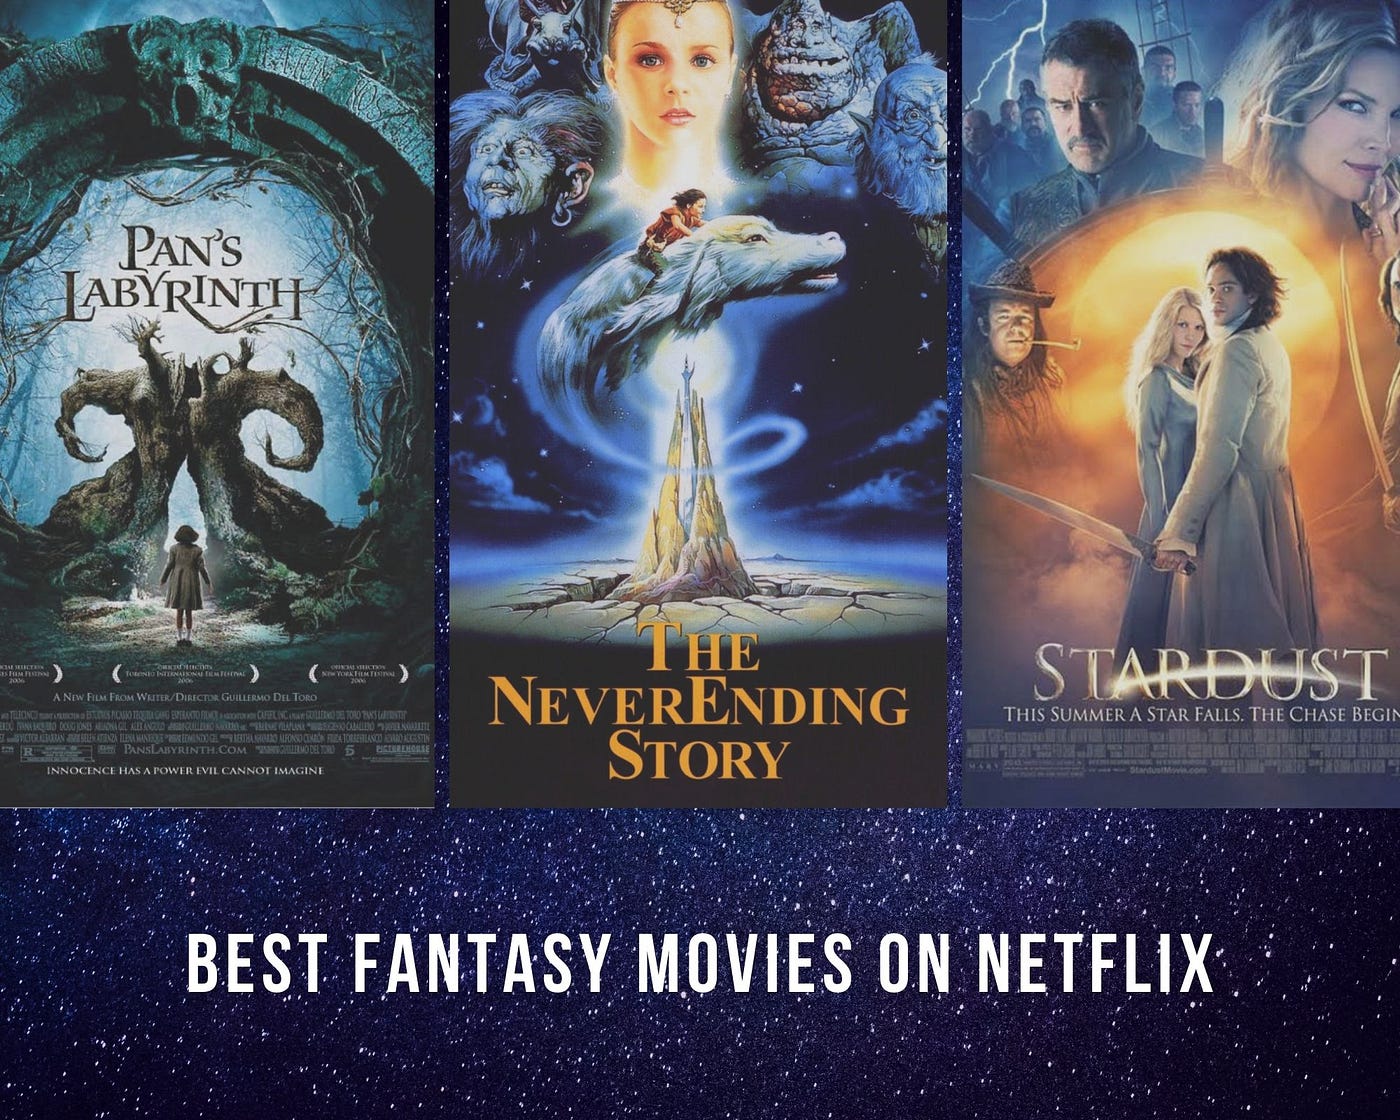 The Absolute Best Fantasy Movies on Netflix - CNET